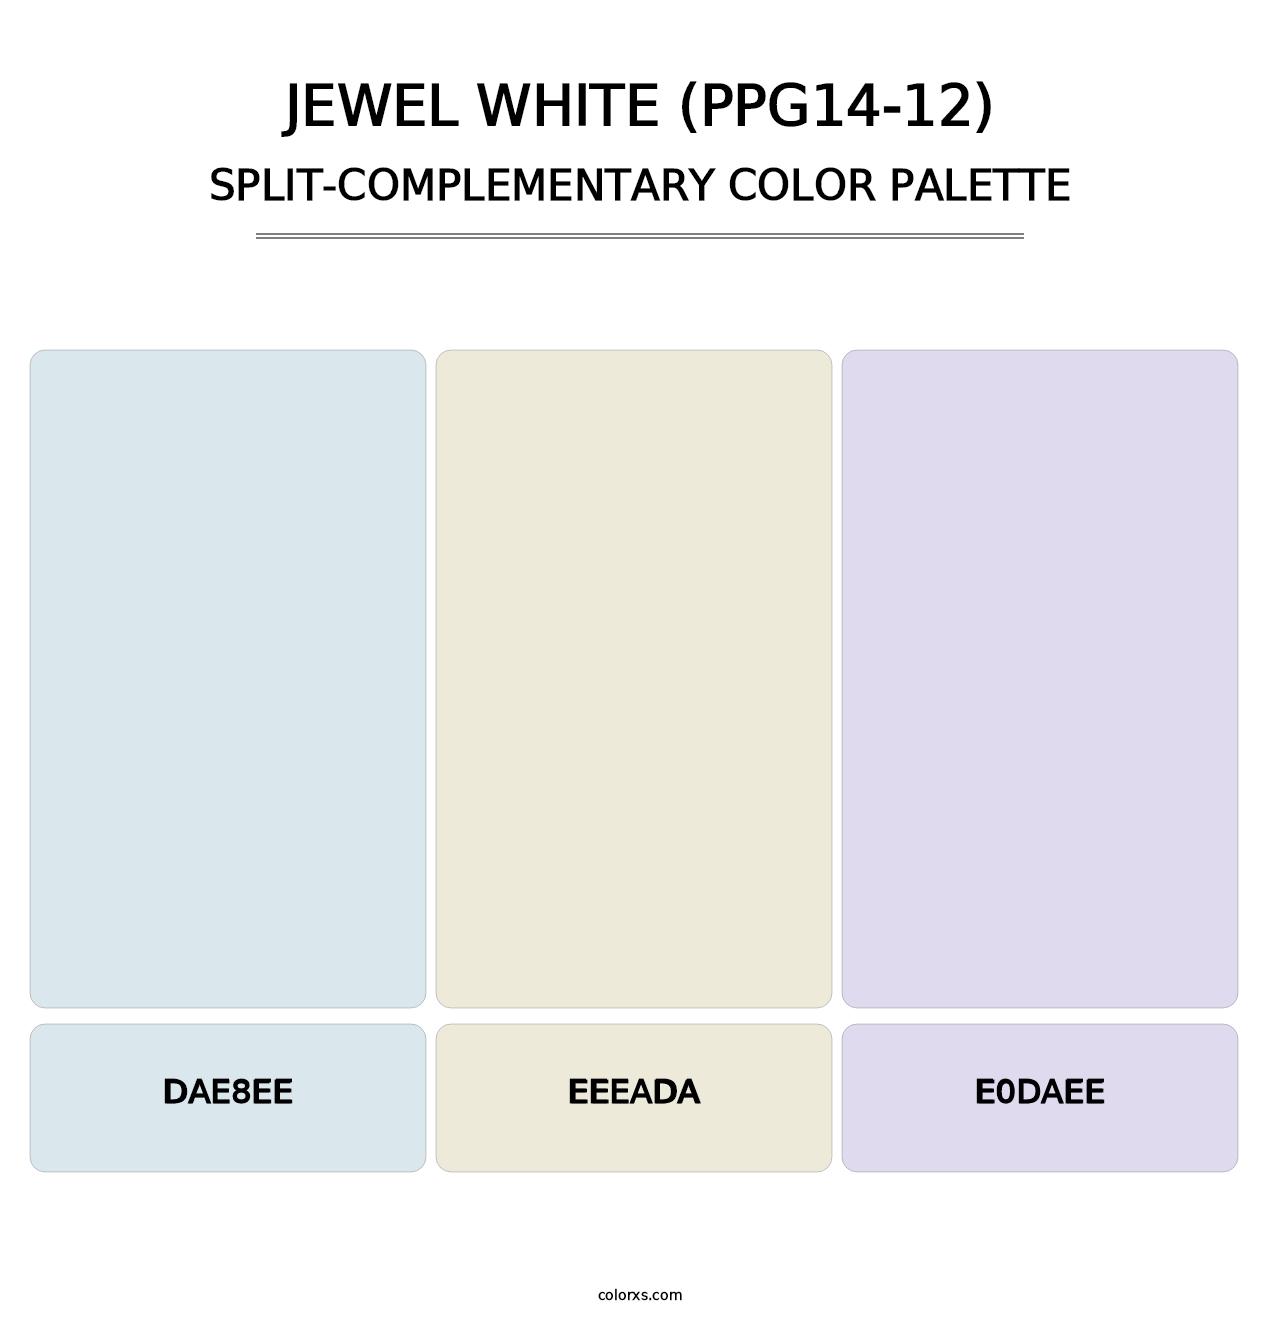 Jewel White (PPG14-12) - Split-Complementary Color Palette